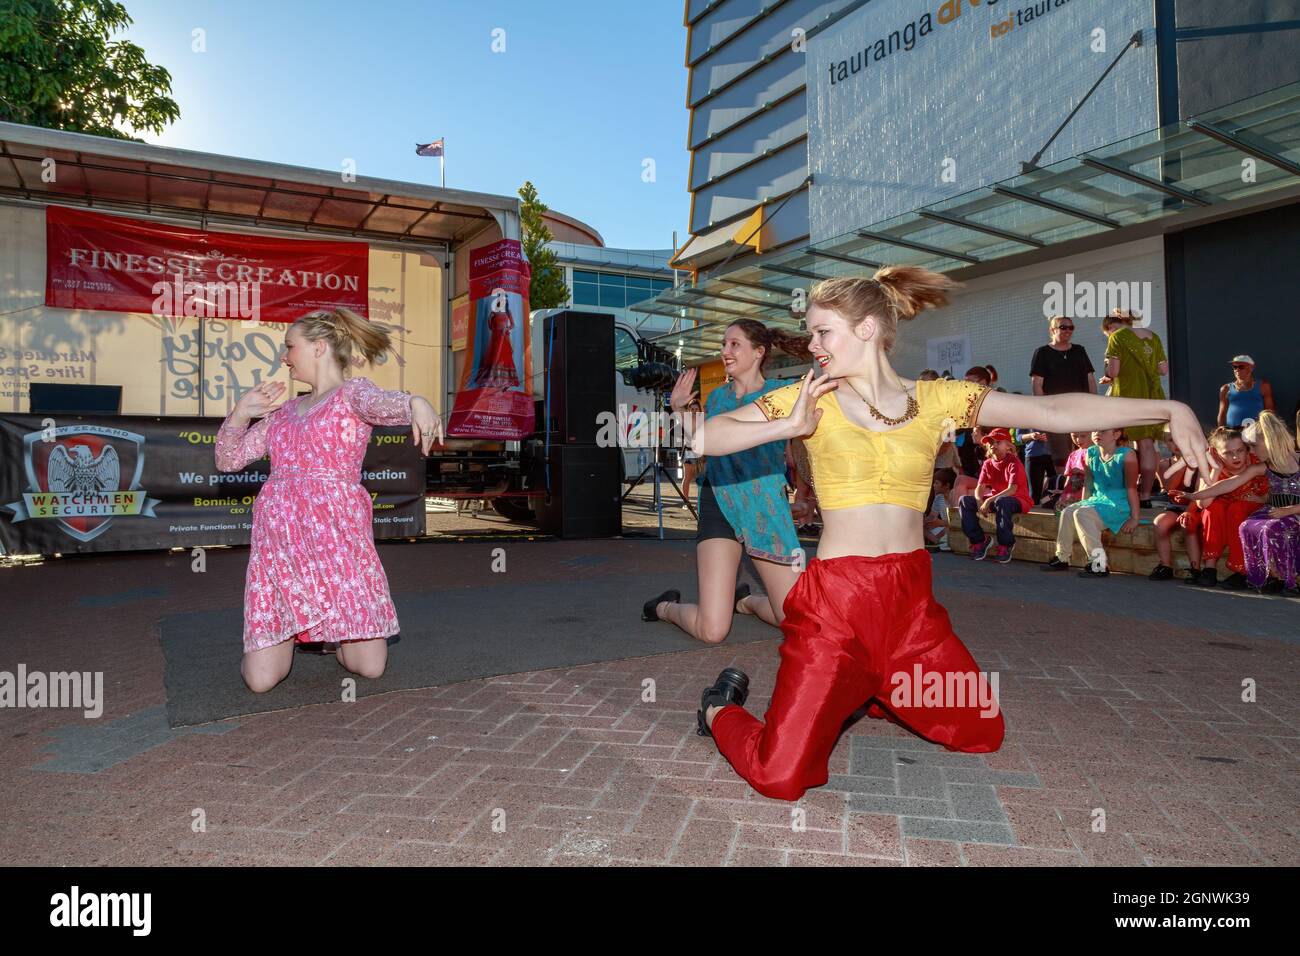 Young women dancing in the street during Diwali (the Hindu festival of lights) celebrations in Tauranga, New Zealand Stock Photo